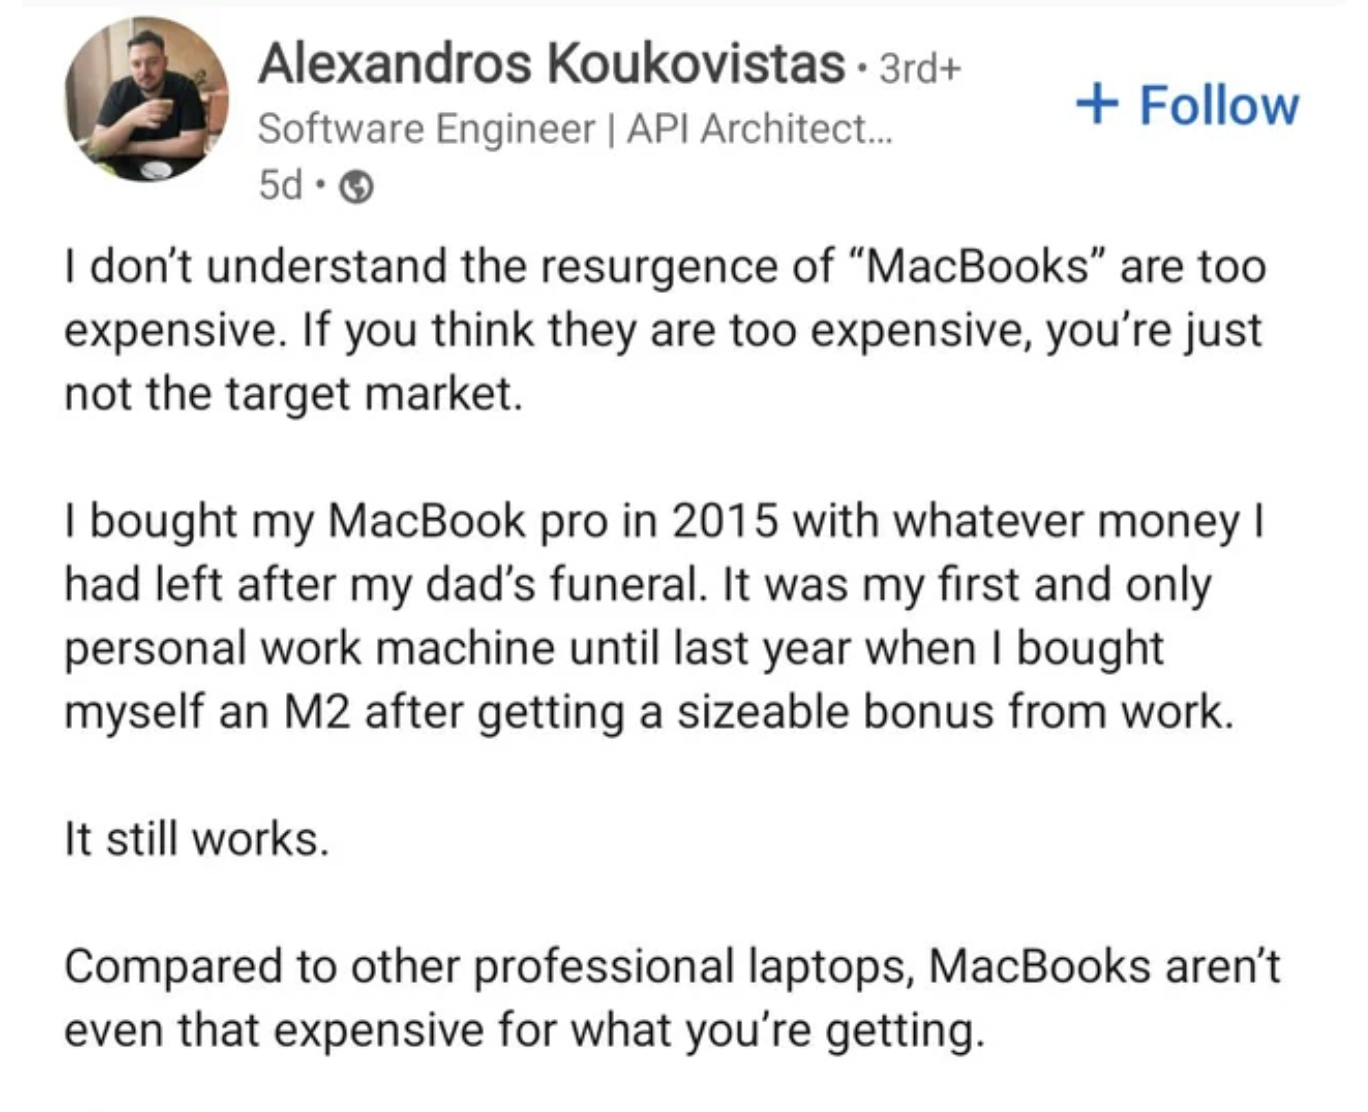 document - Alexandros Koukovistas 3rd Software Engineer | Api Architect... 5d I don't understand the resurgence of "MacBooks" are too expensive. If you think they are too expensive, you're just not the target market. I bought my MacBook pro in 2015 with w